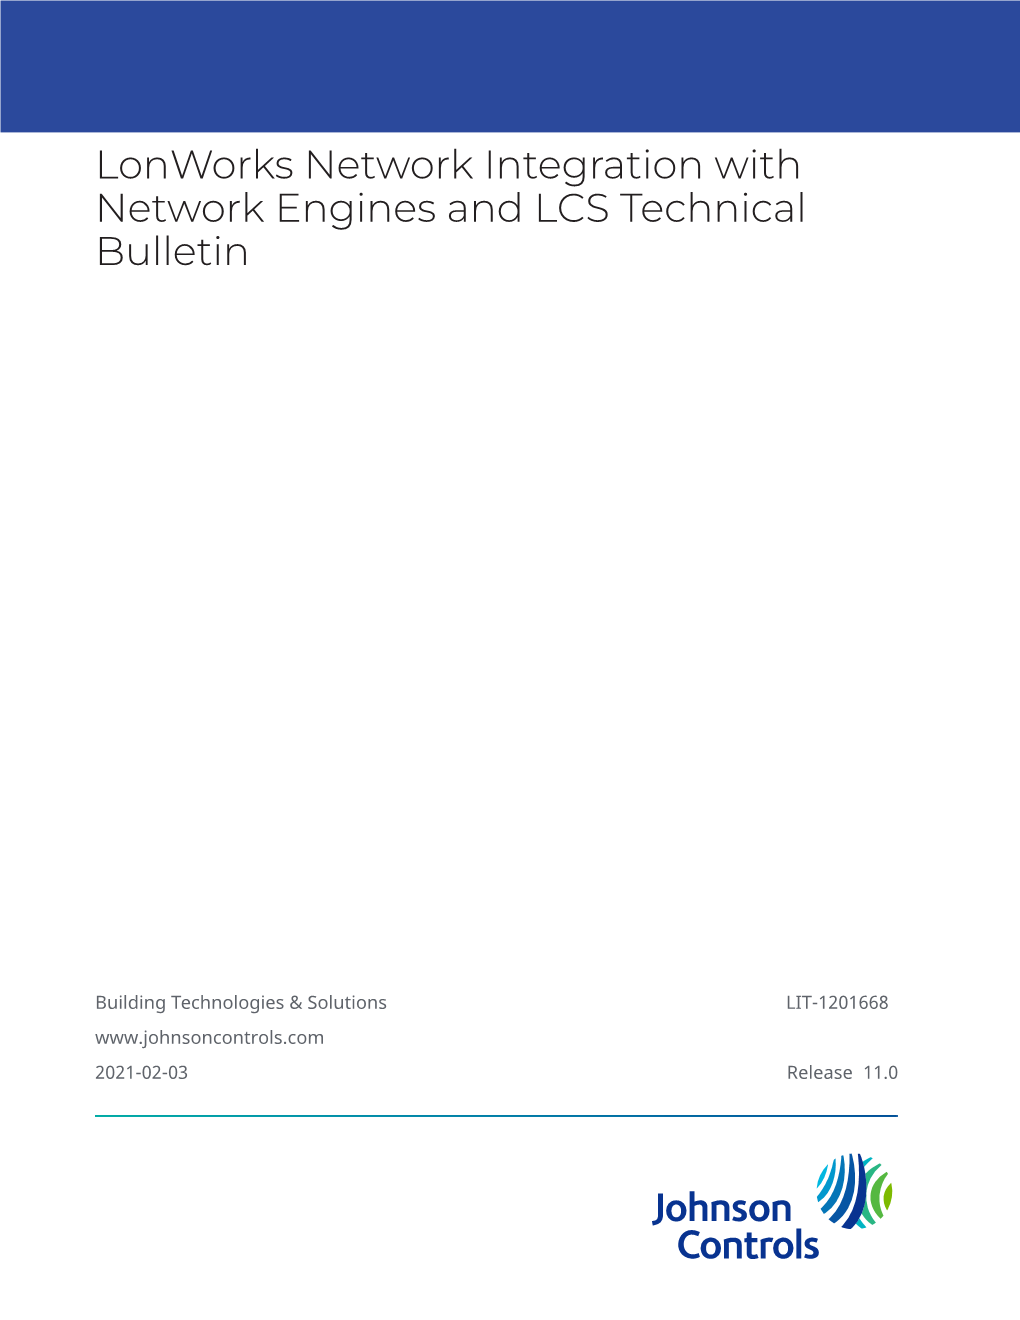 Lonworks Network Integration with Network Engines and LCS Technical Bulletin